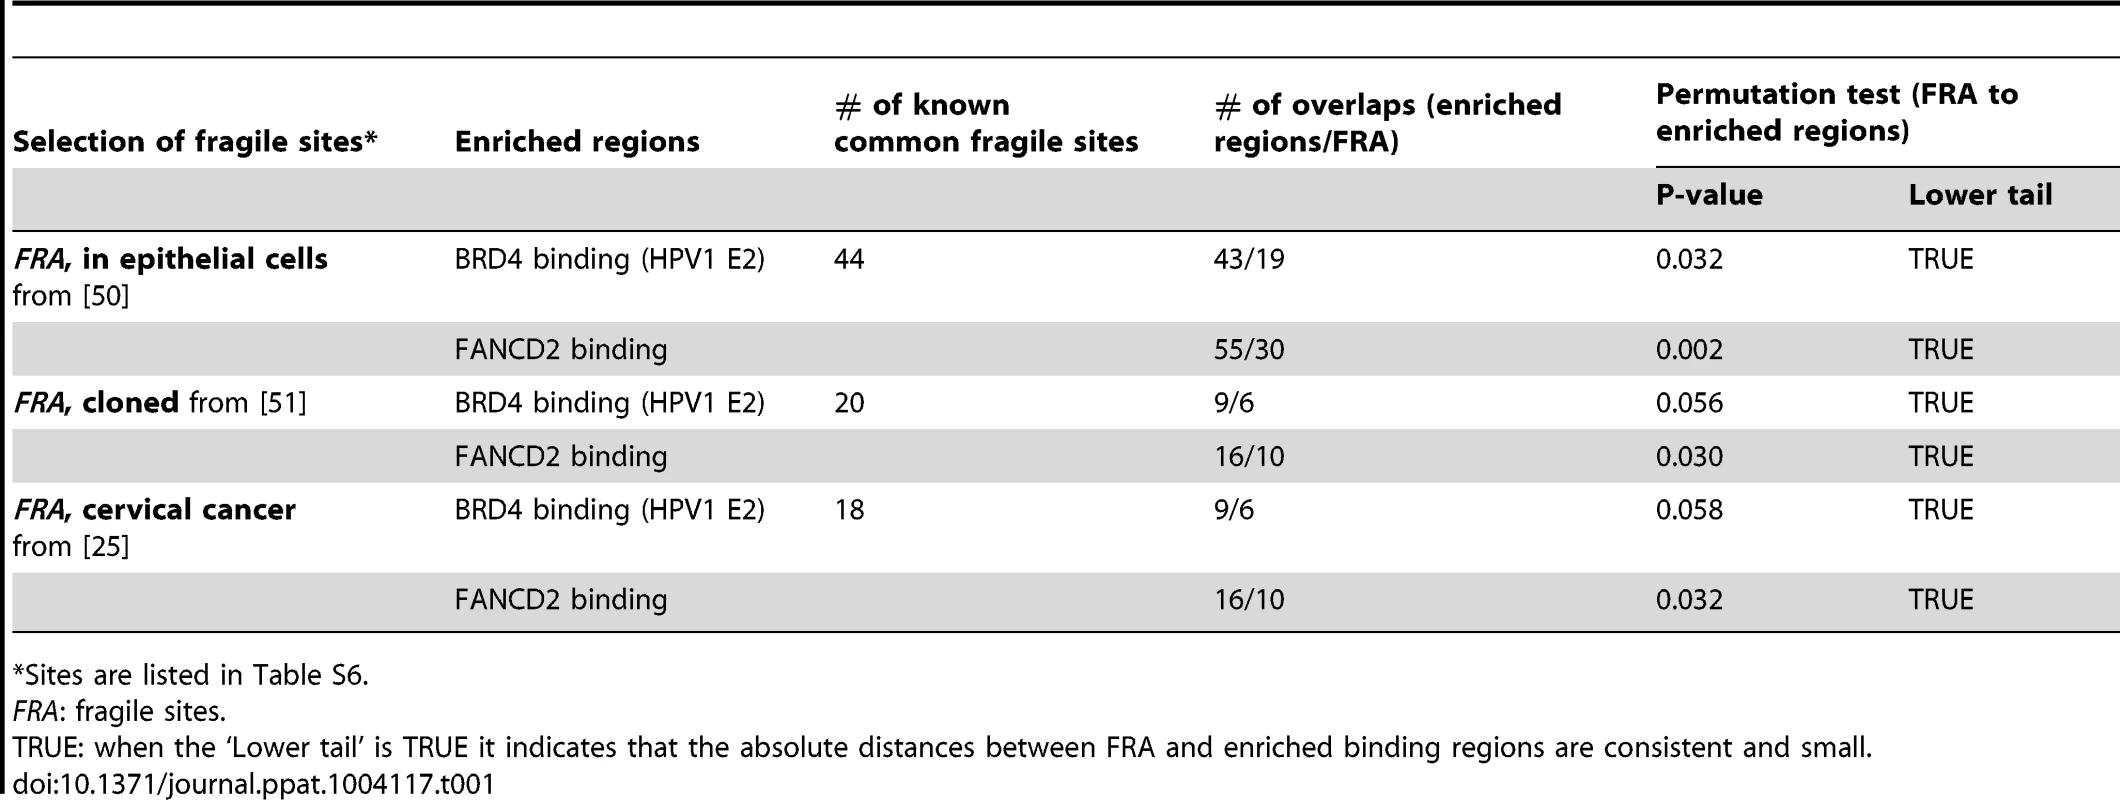 Association of common fragile sites with PEB-BLOCs and FANCD2 binding.